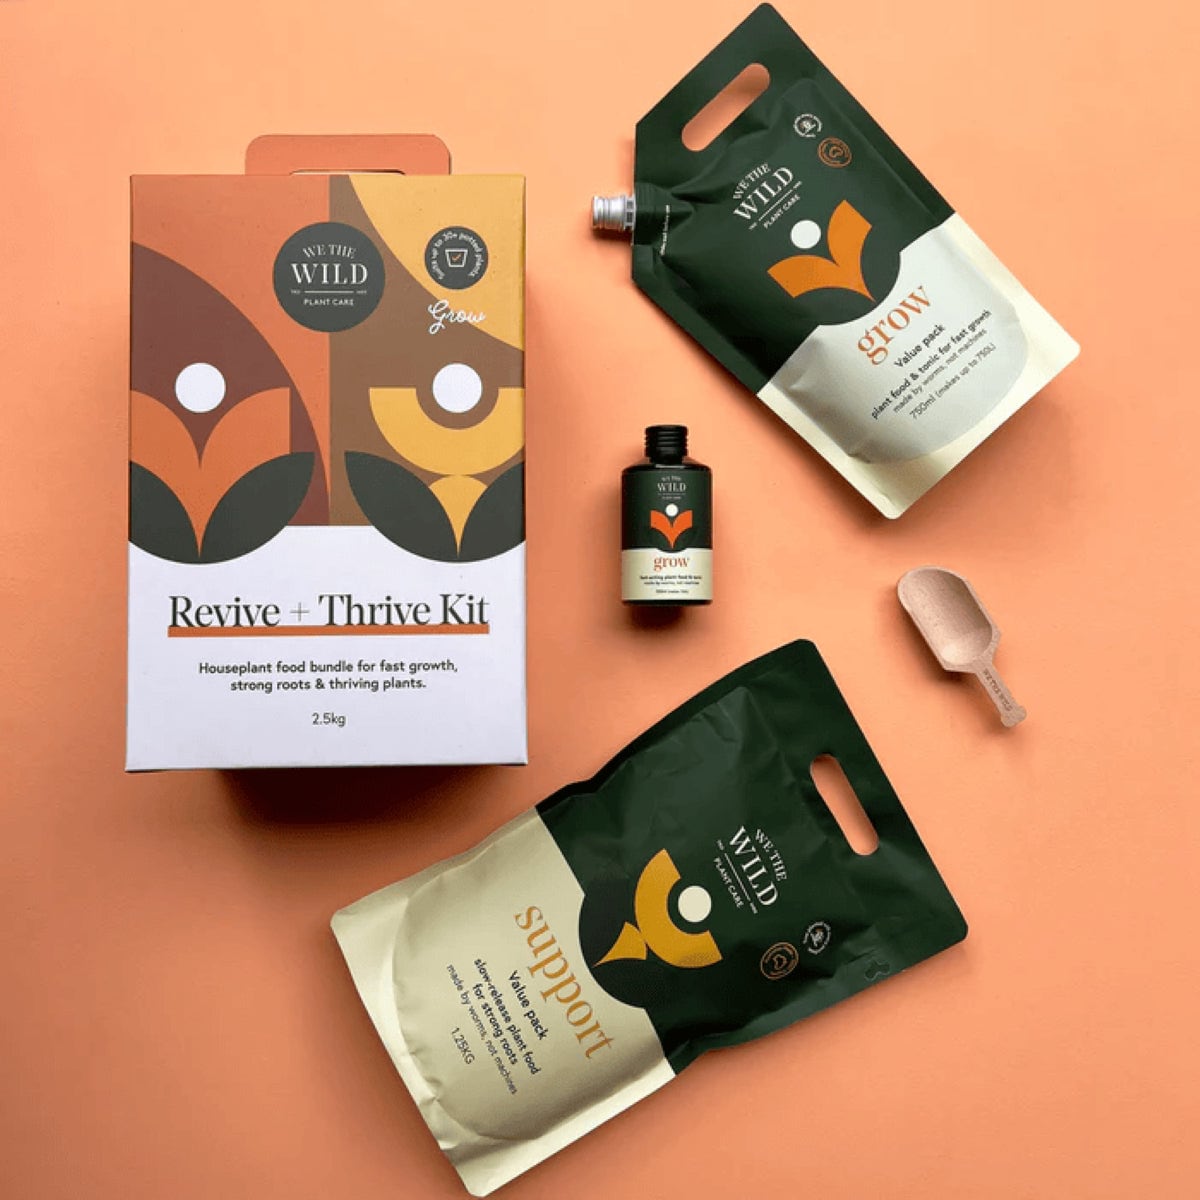 We The Wild Plant Care Revive + Thrive Kit